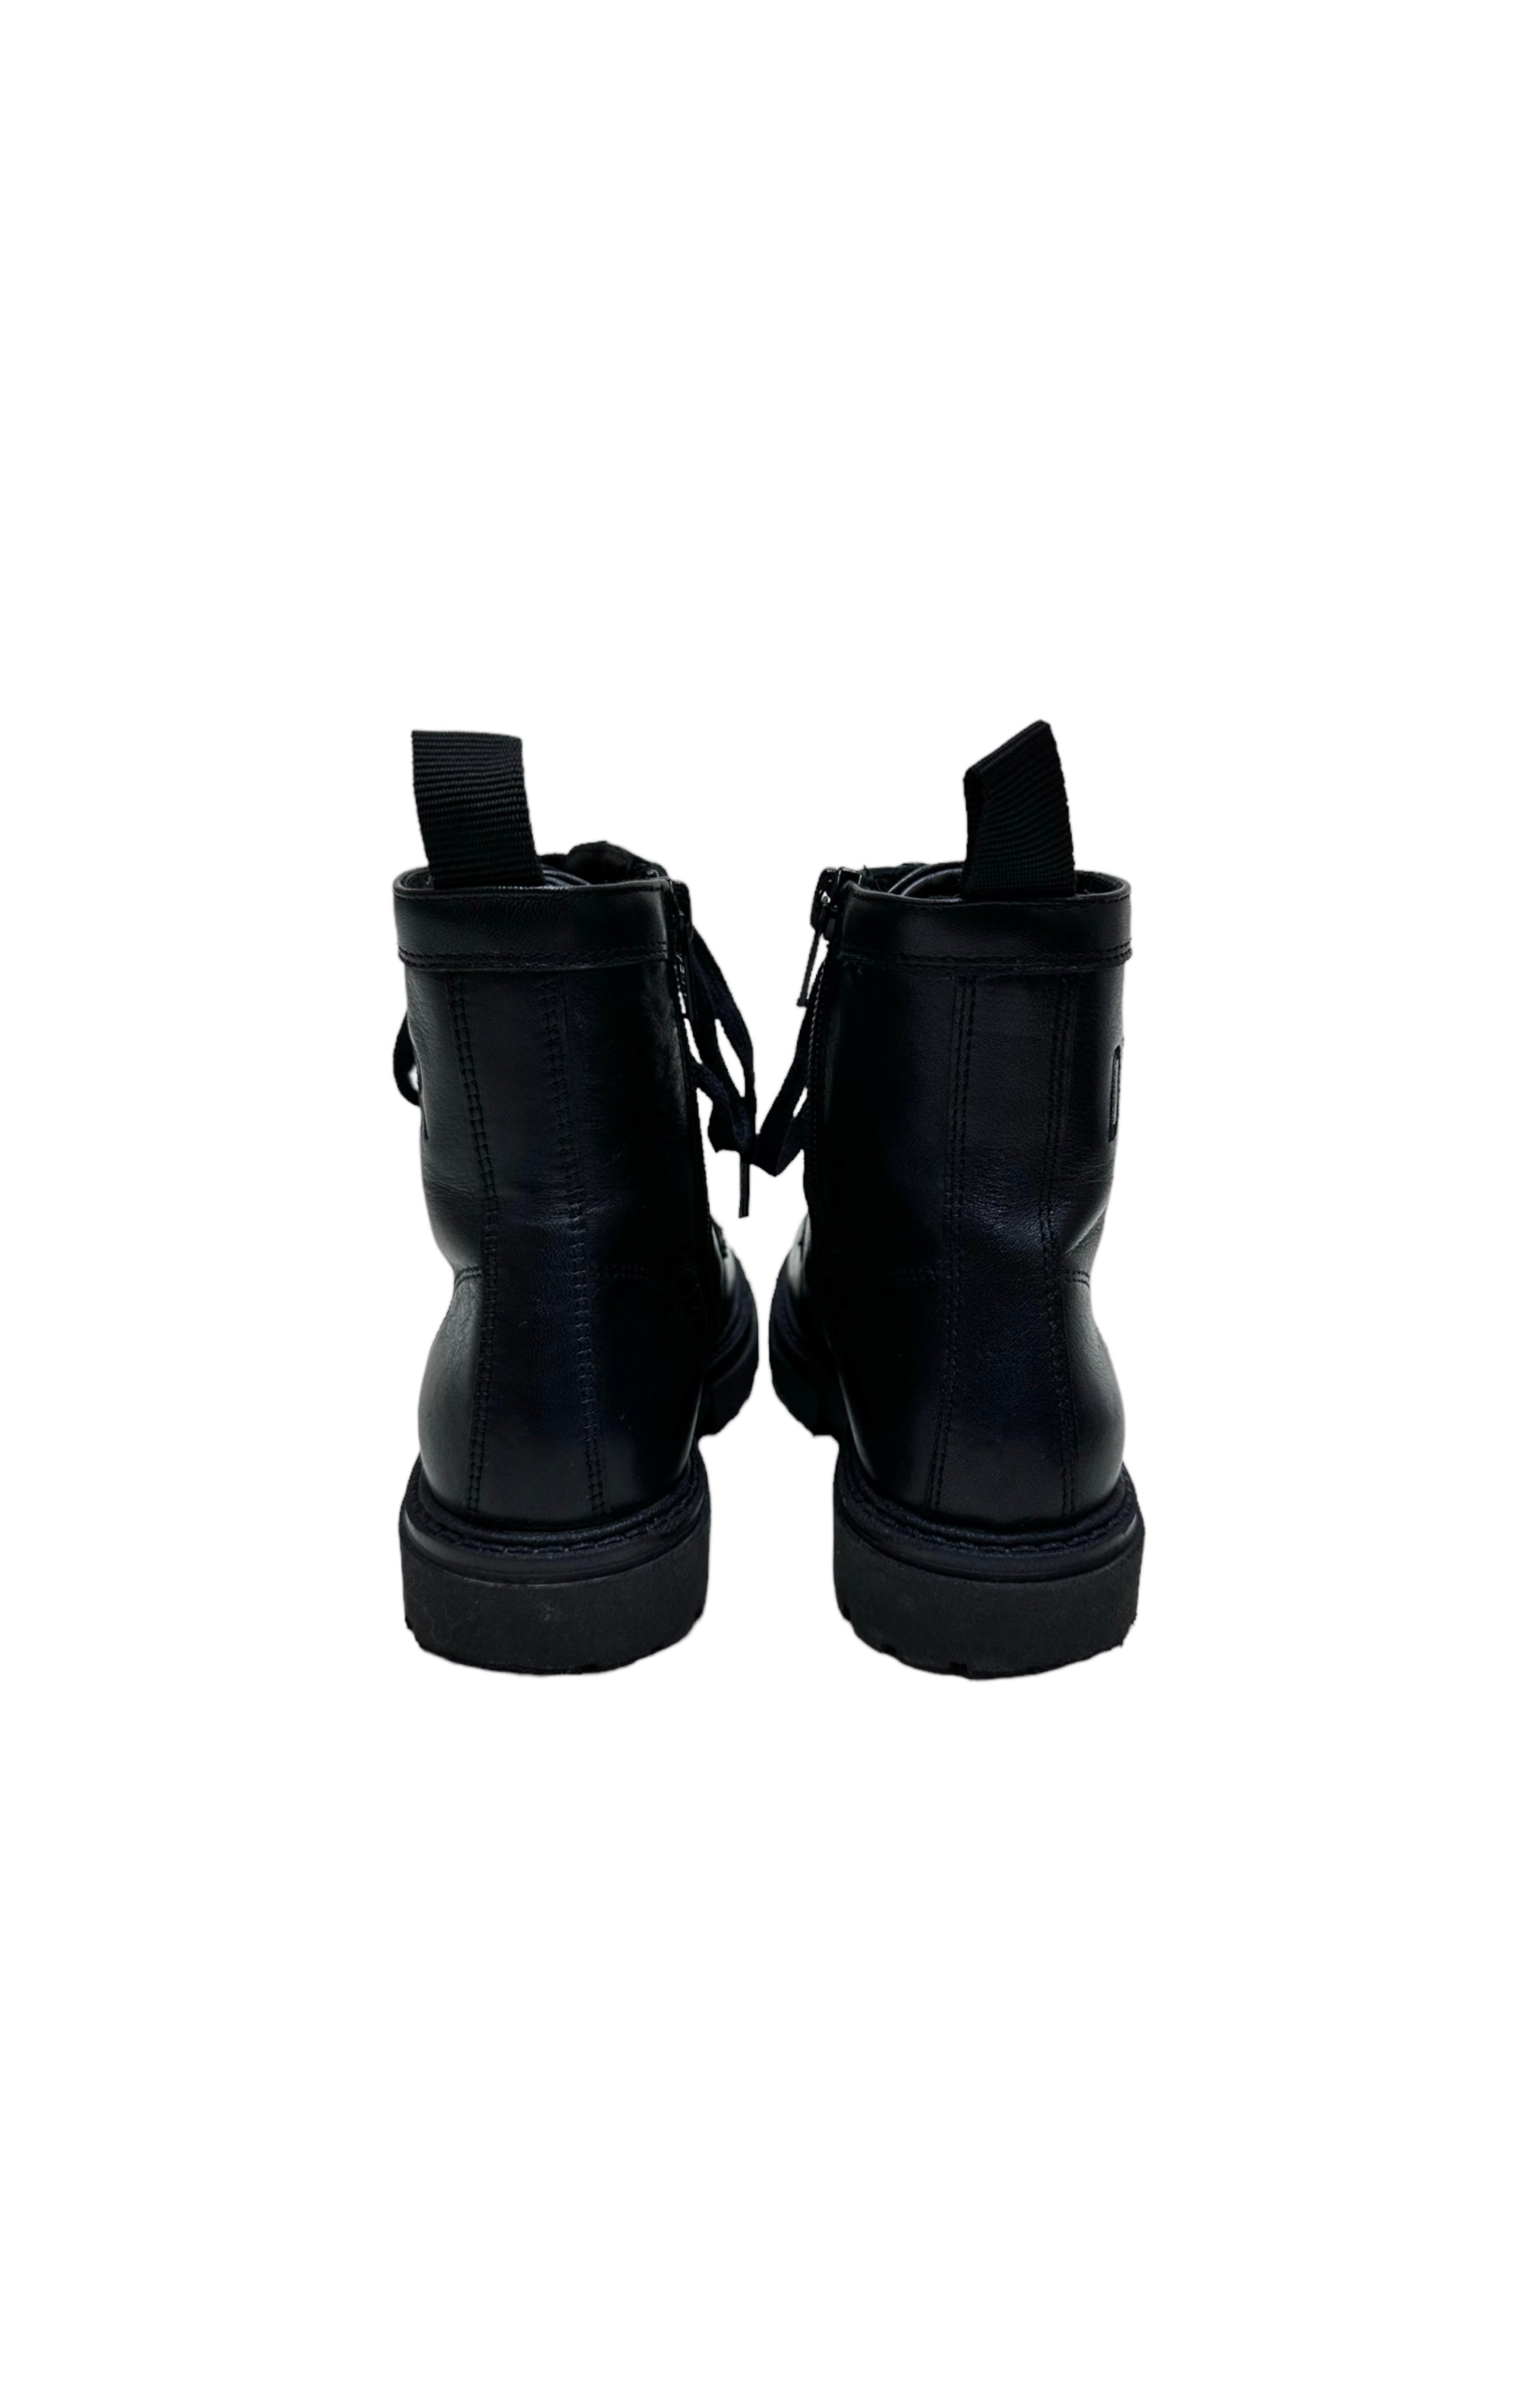 DIOR (RARE) Boots Size: EUR 28 / Fit like Toddler US 11